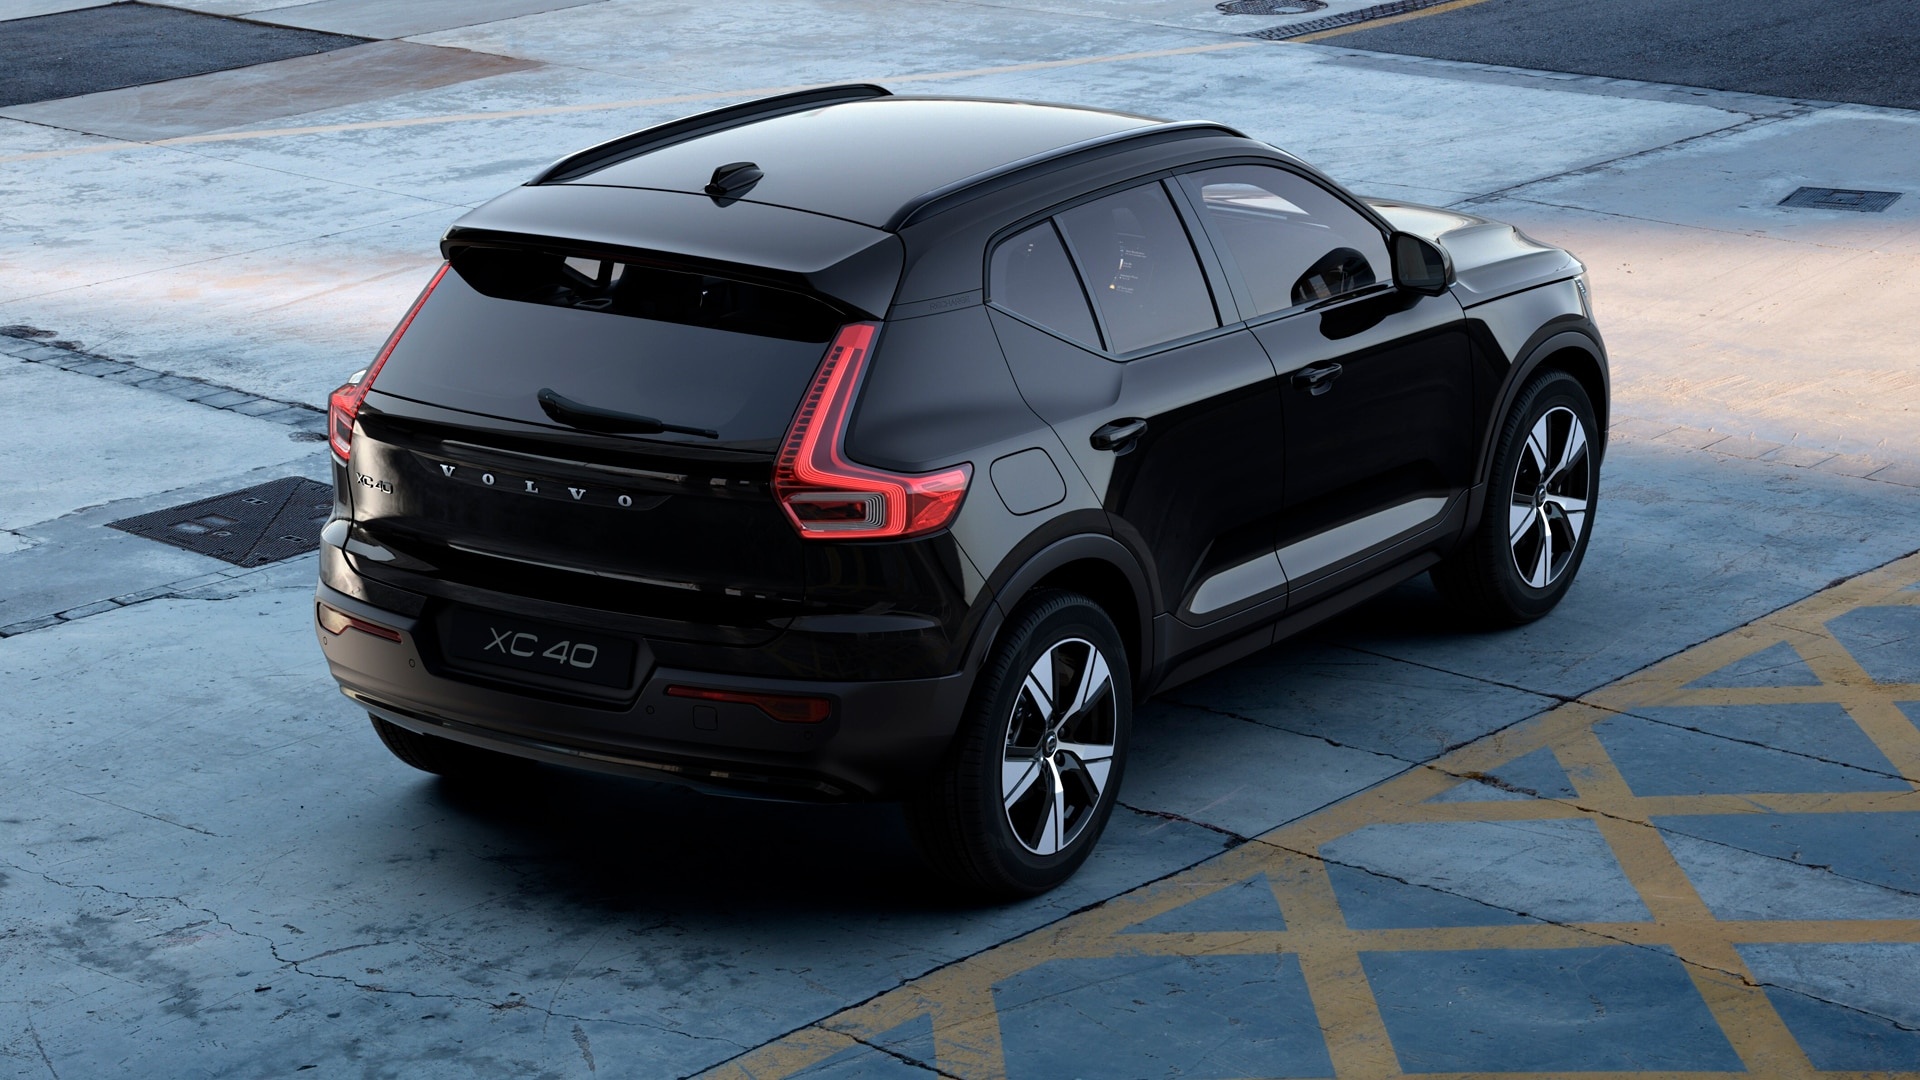 Volvo XC40 Recharge, Overview, Volvo Cars sterreich, Auto expert, 1920x1080 Full HD Desktop